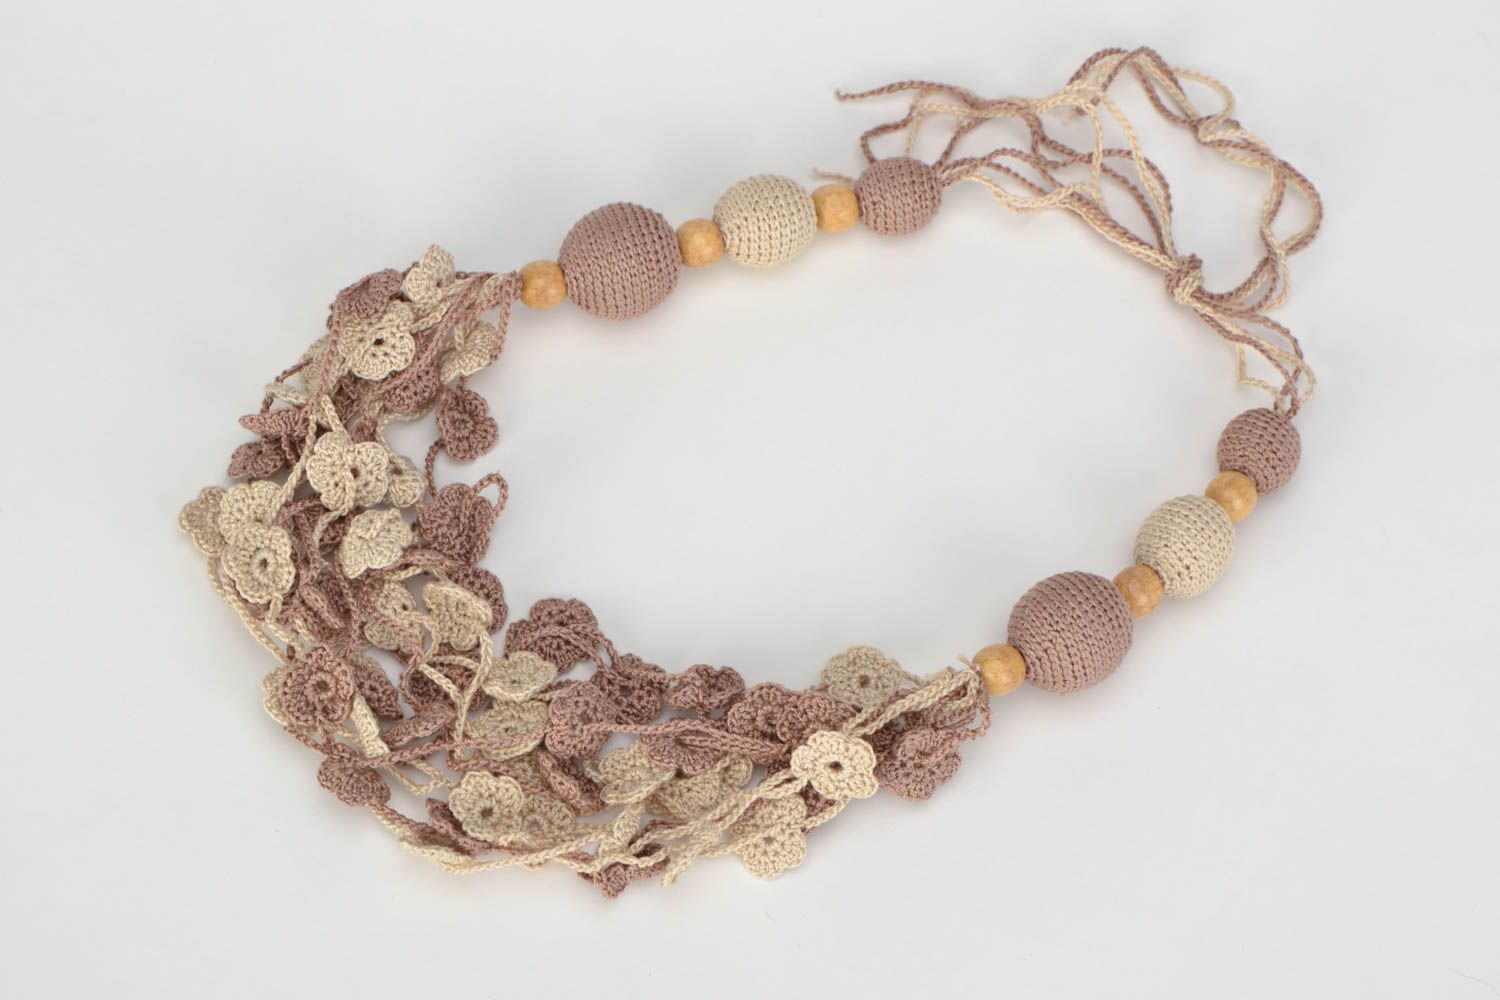 Handmade women's crochet necklace with wooden beads and flowers photo 2